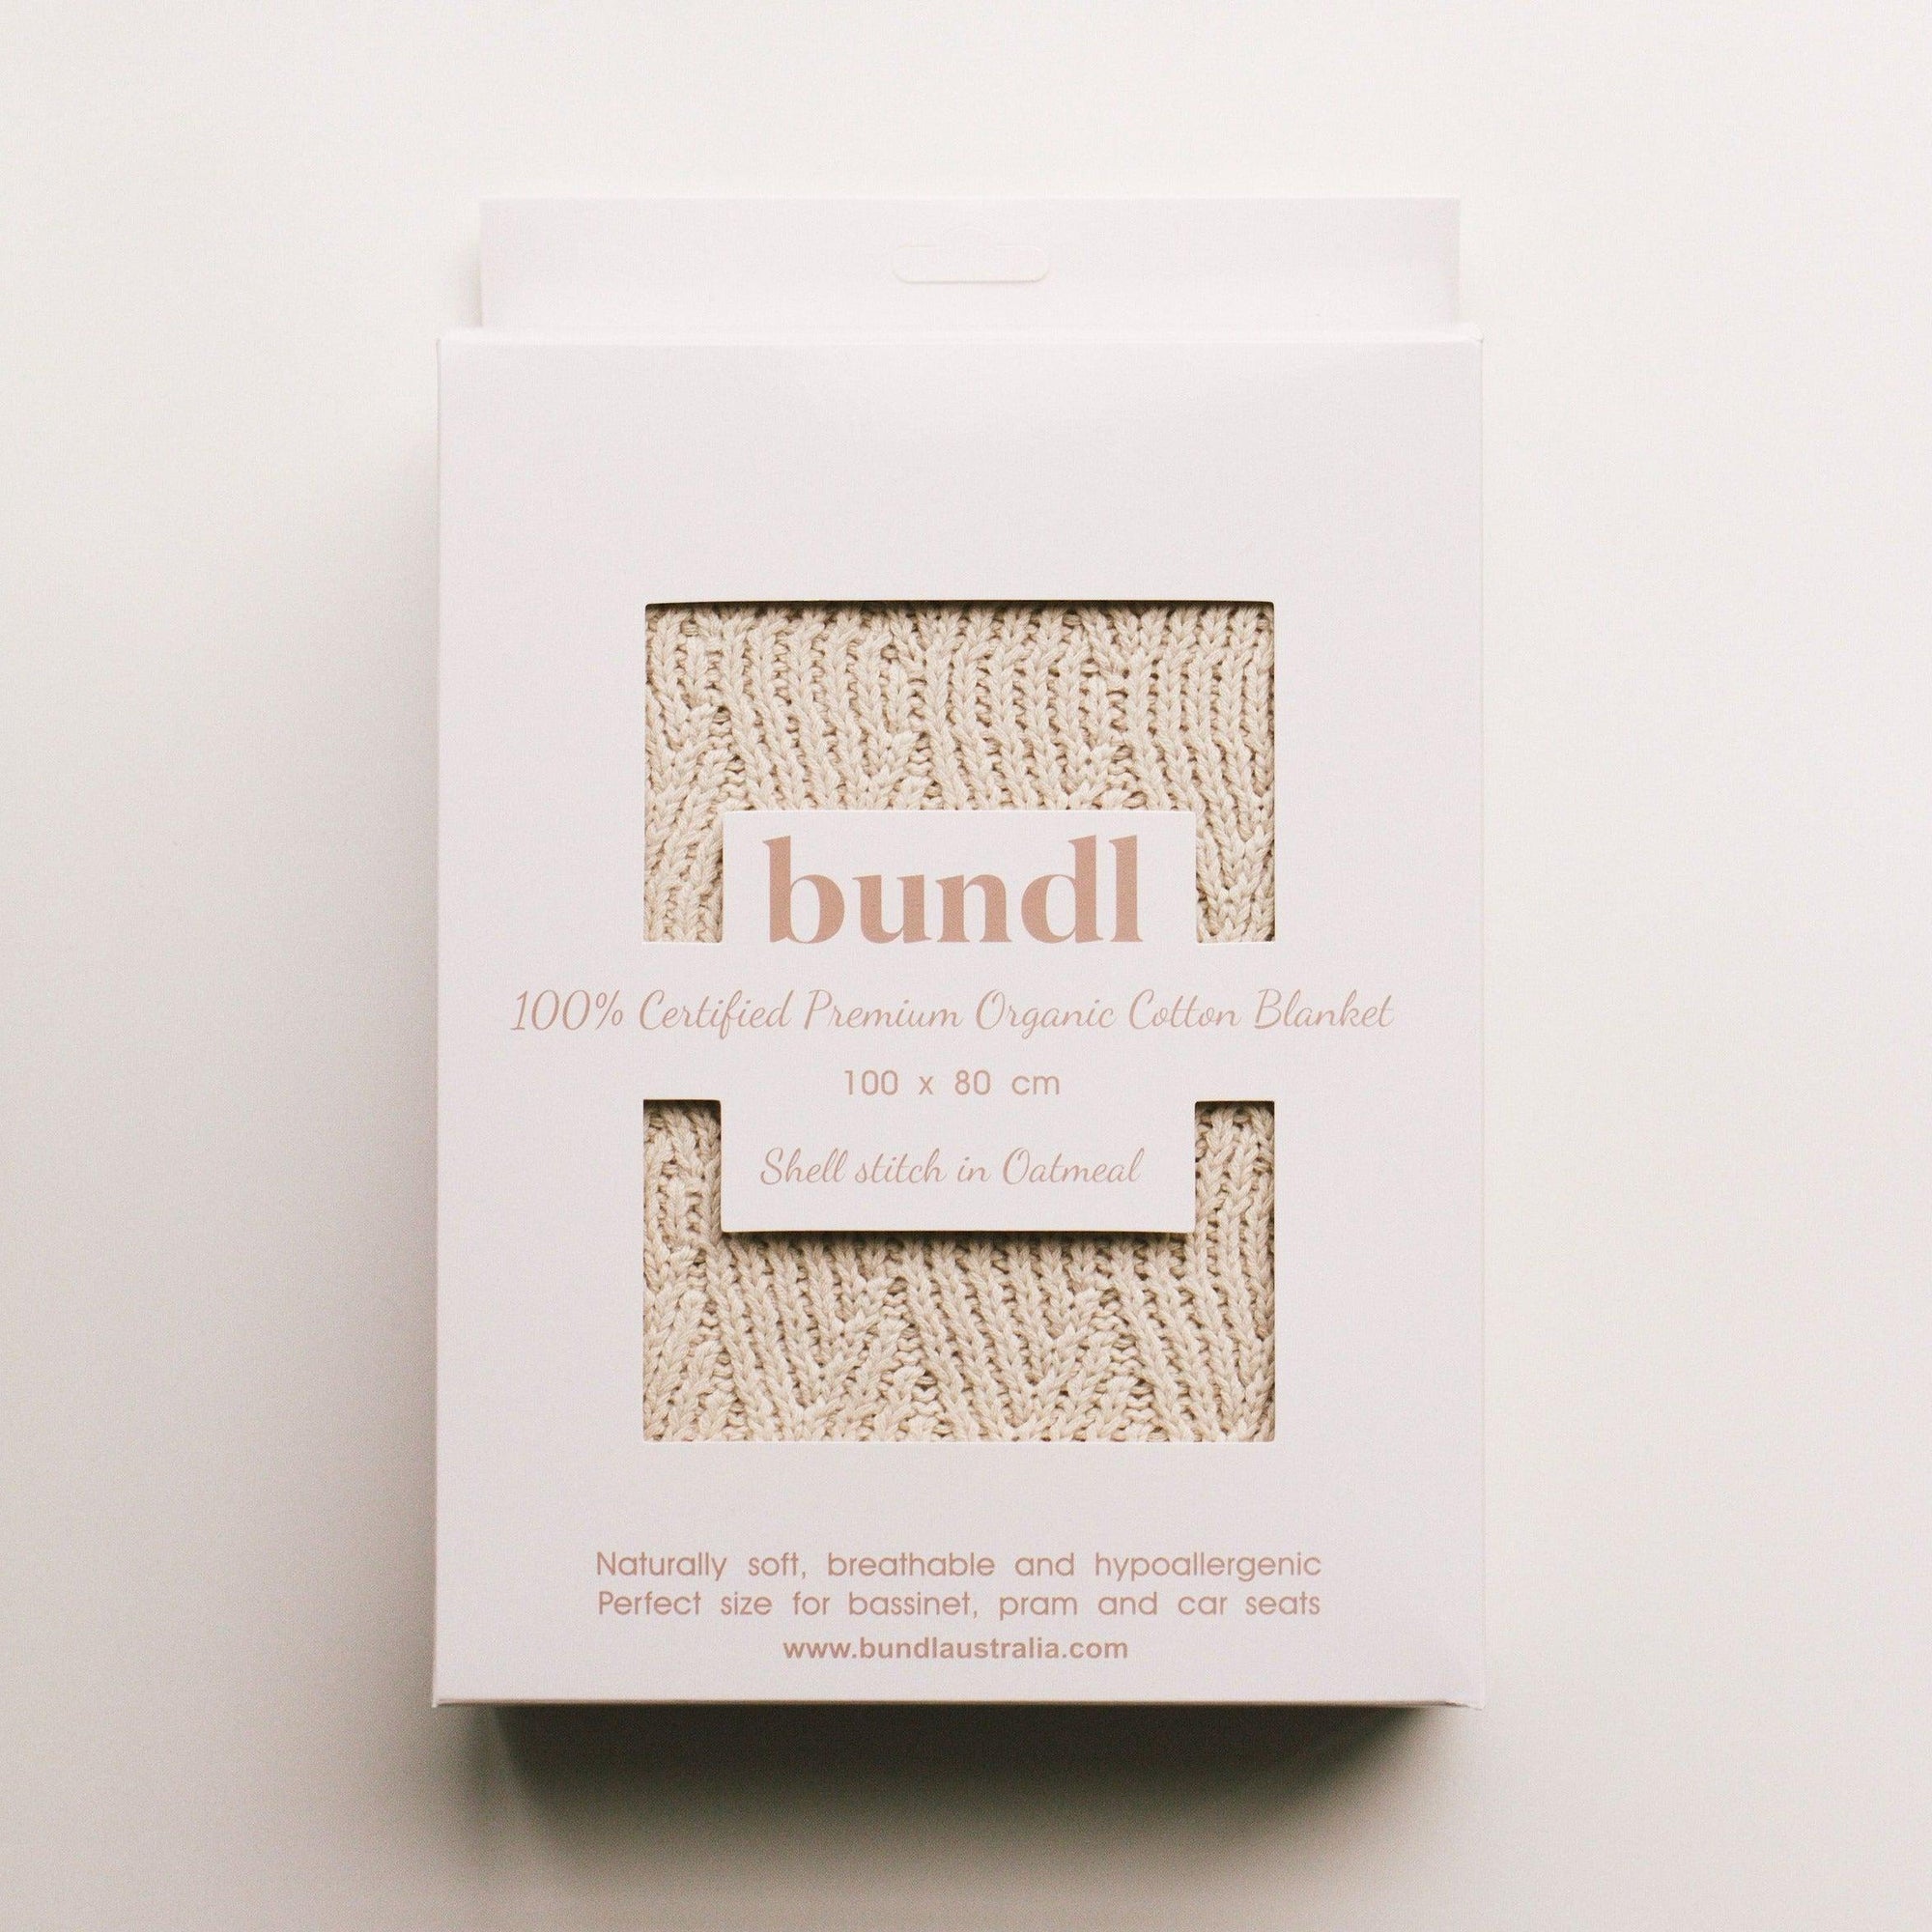 A white box with the word Bundl. on it, containing an Organic Cotton Blanket.